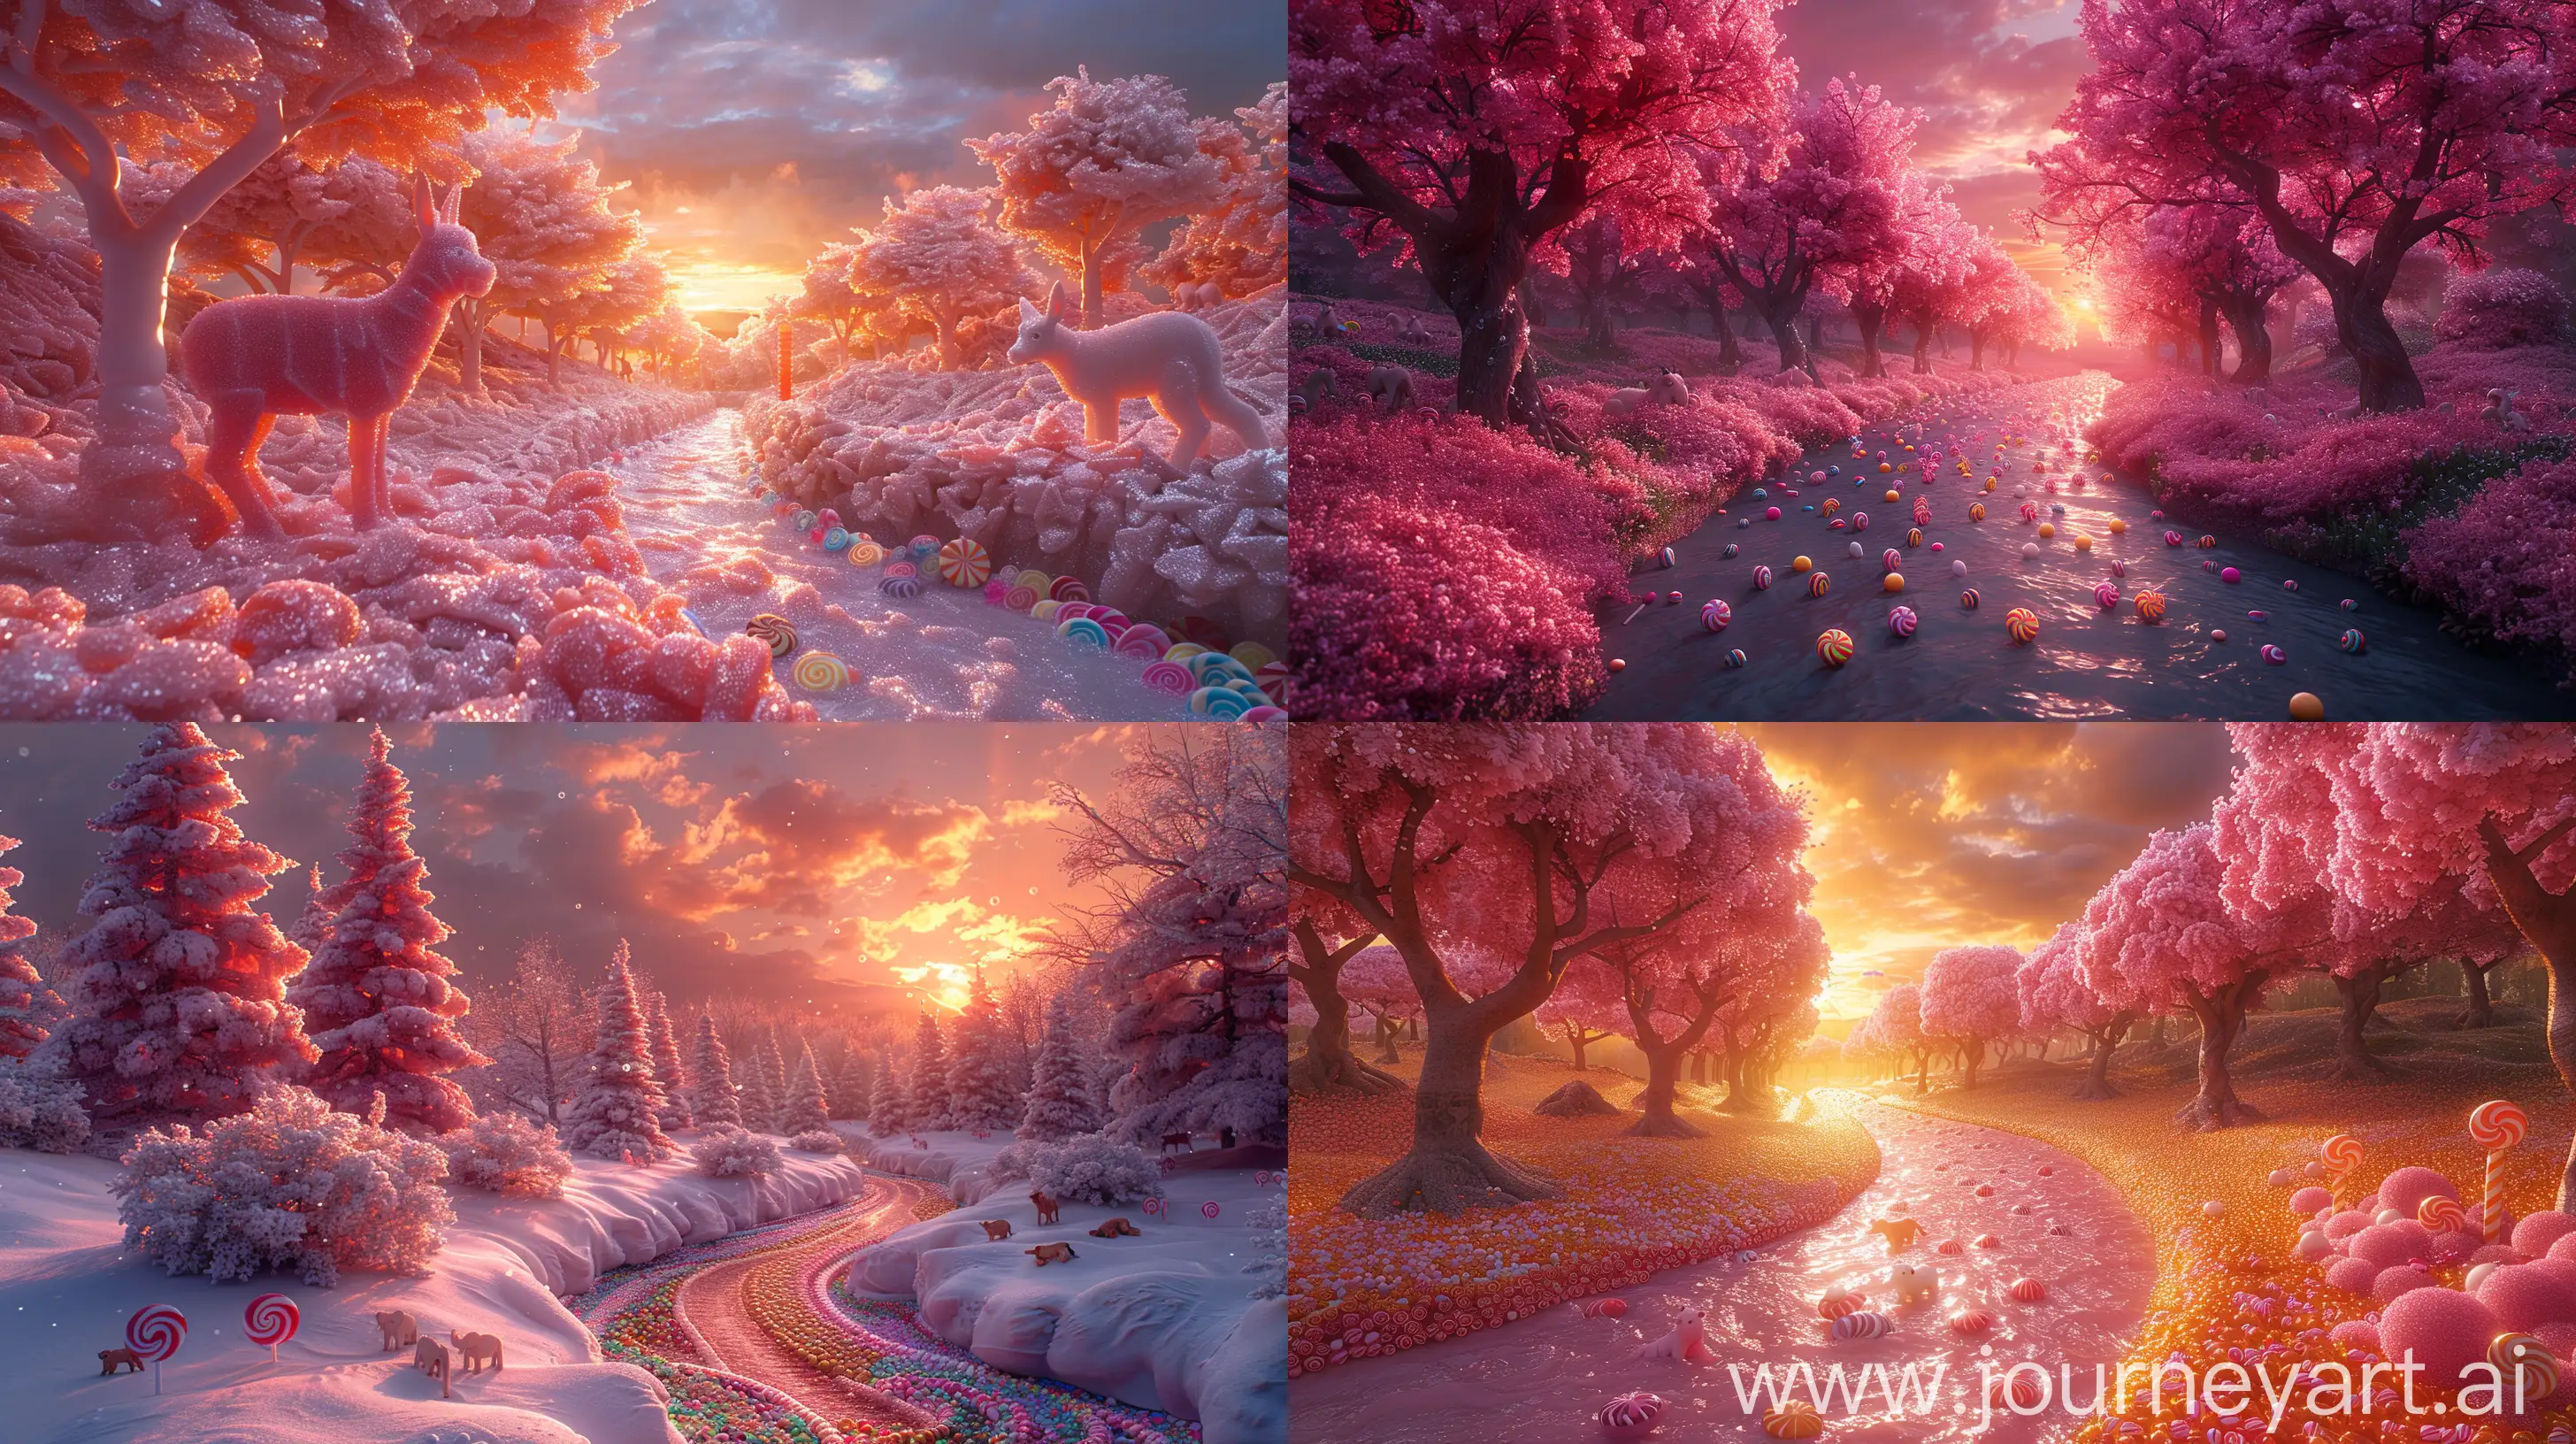 Magical-Enchanting-Forest-with-Candy-River-and-Lollipop-Trees-at-Sunset